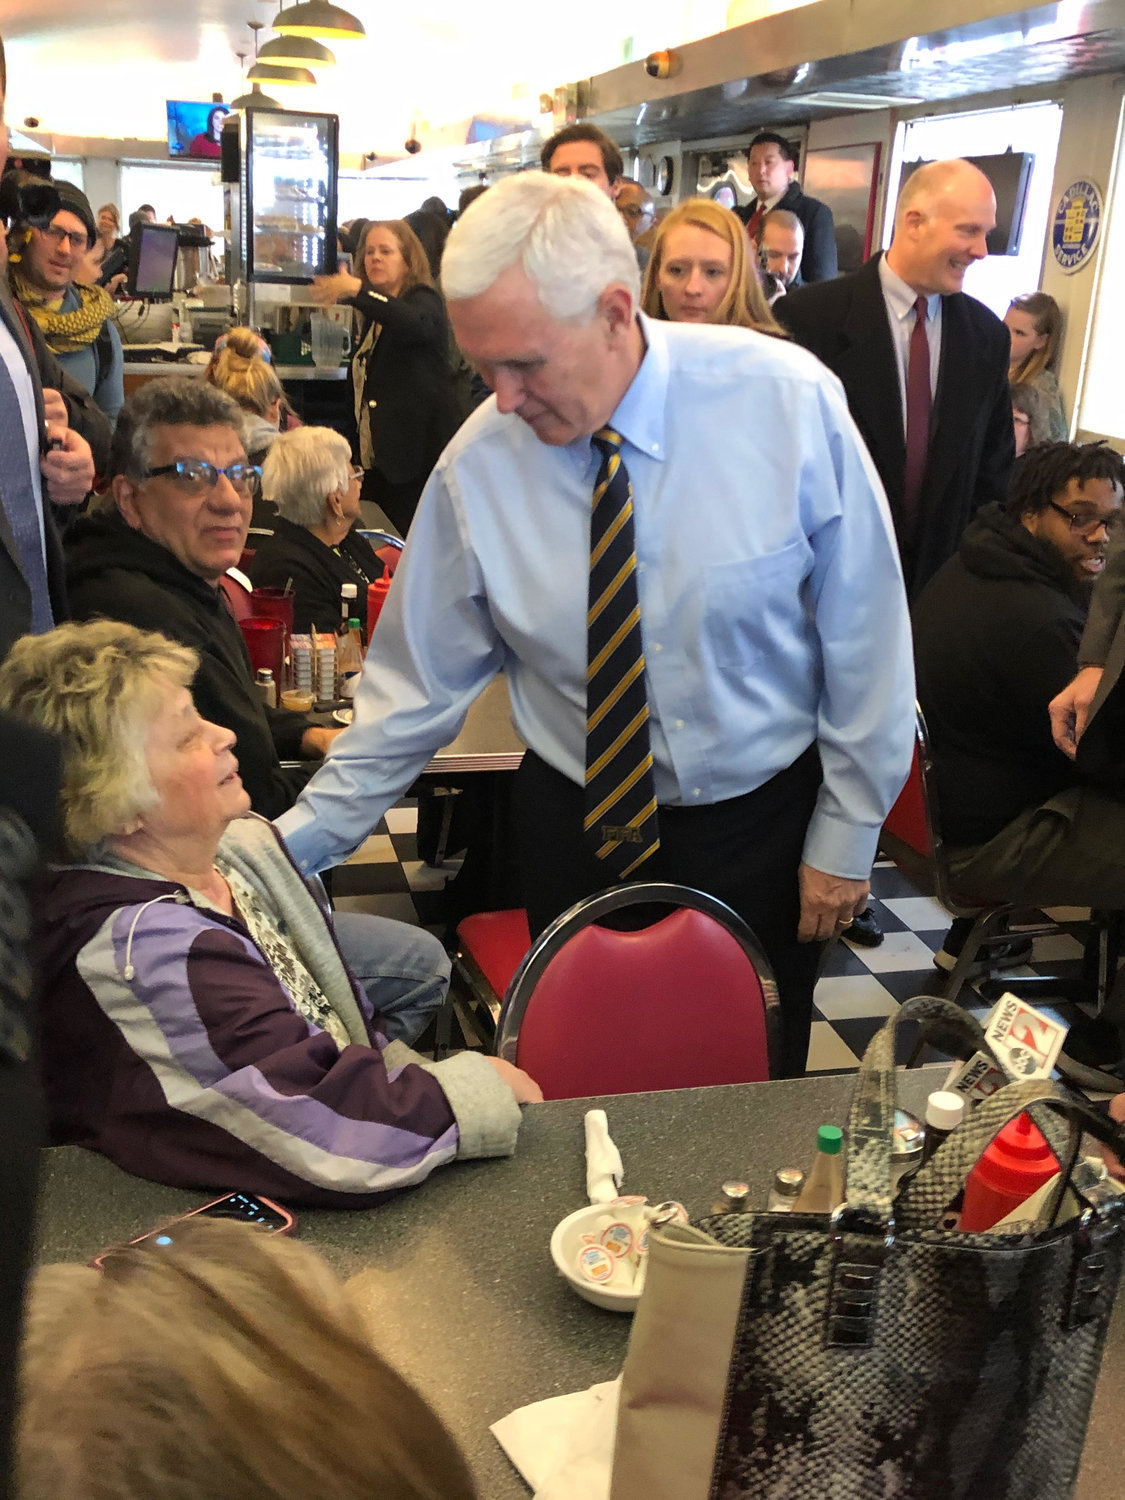 Vice President Mike Pence greets a woman at Fleetwood Diner in Lansing.